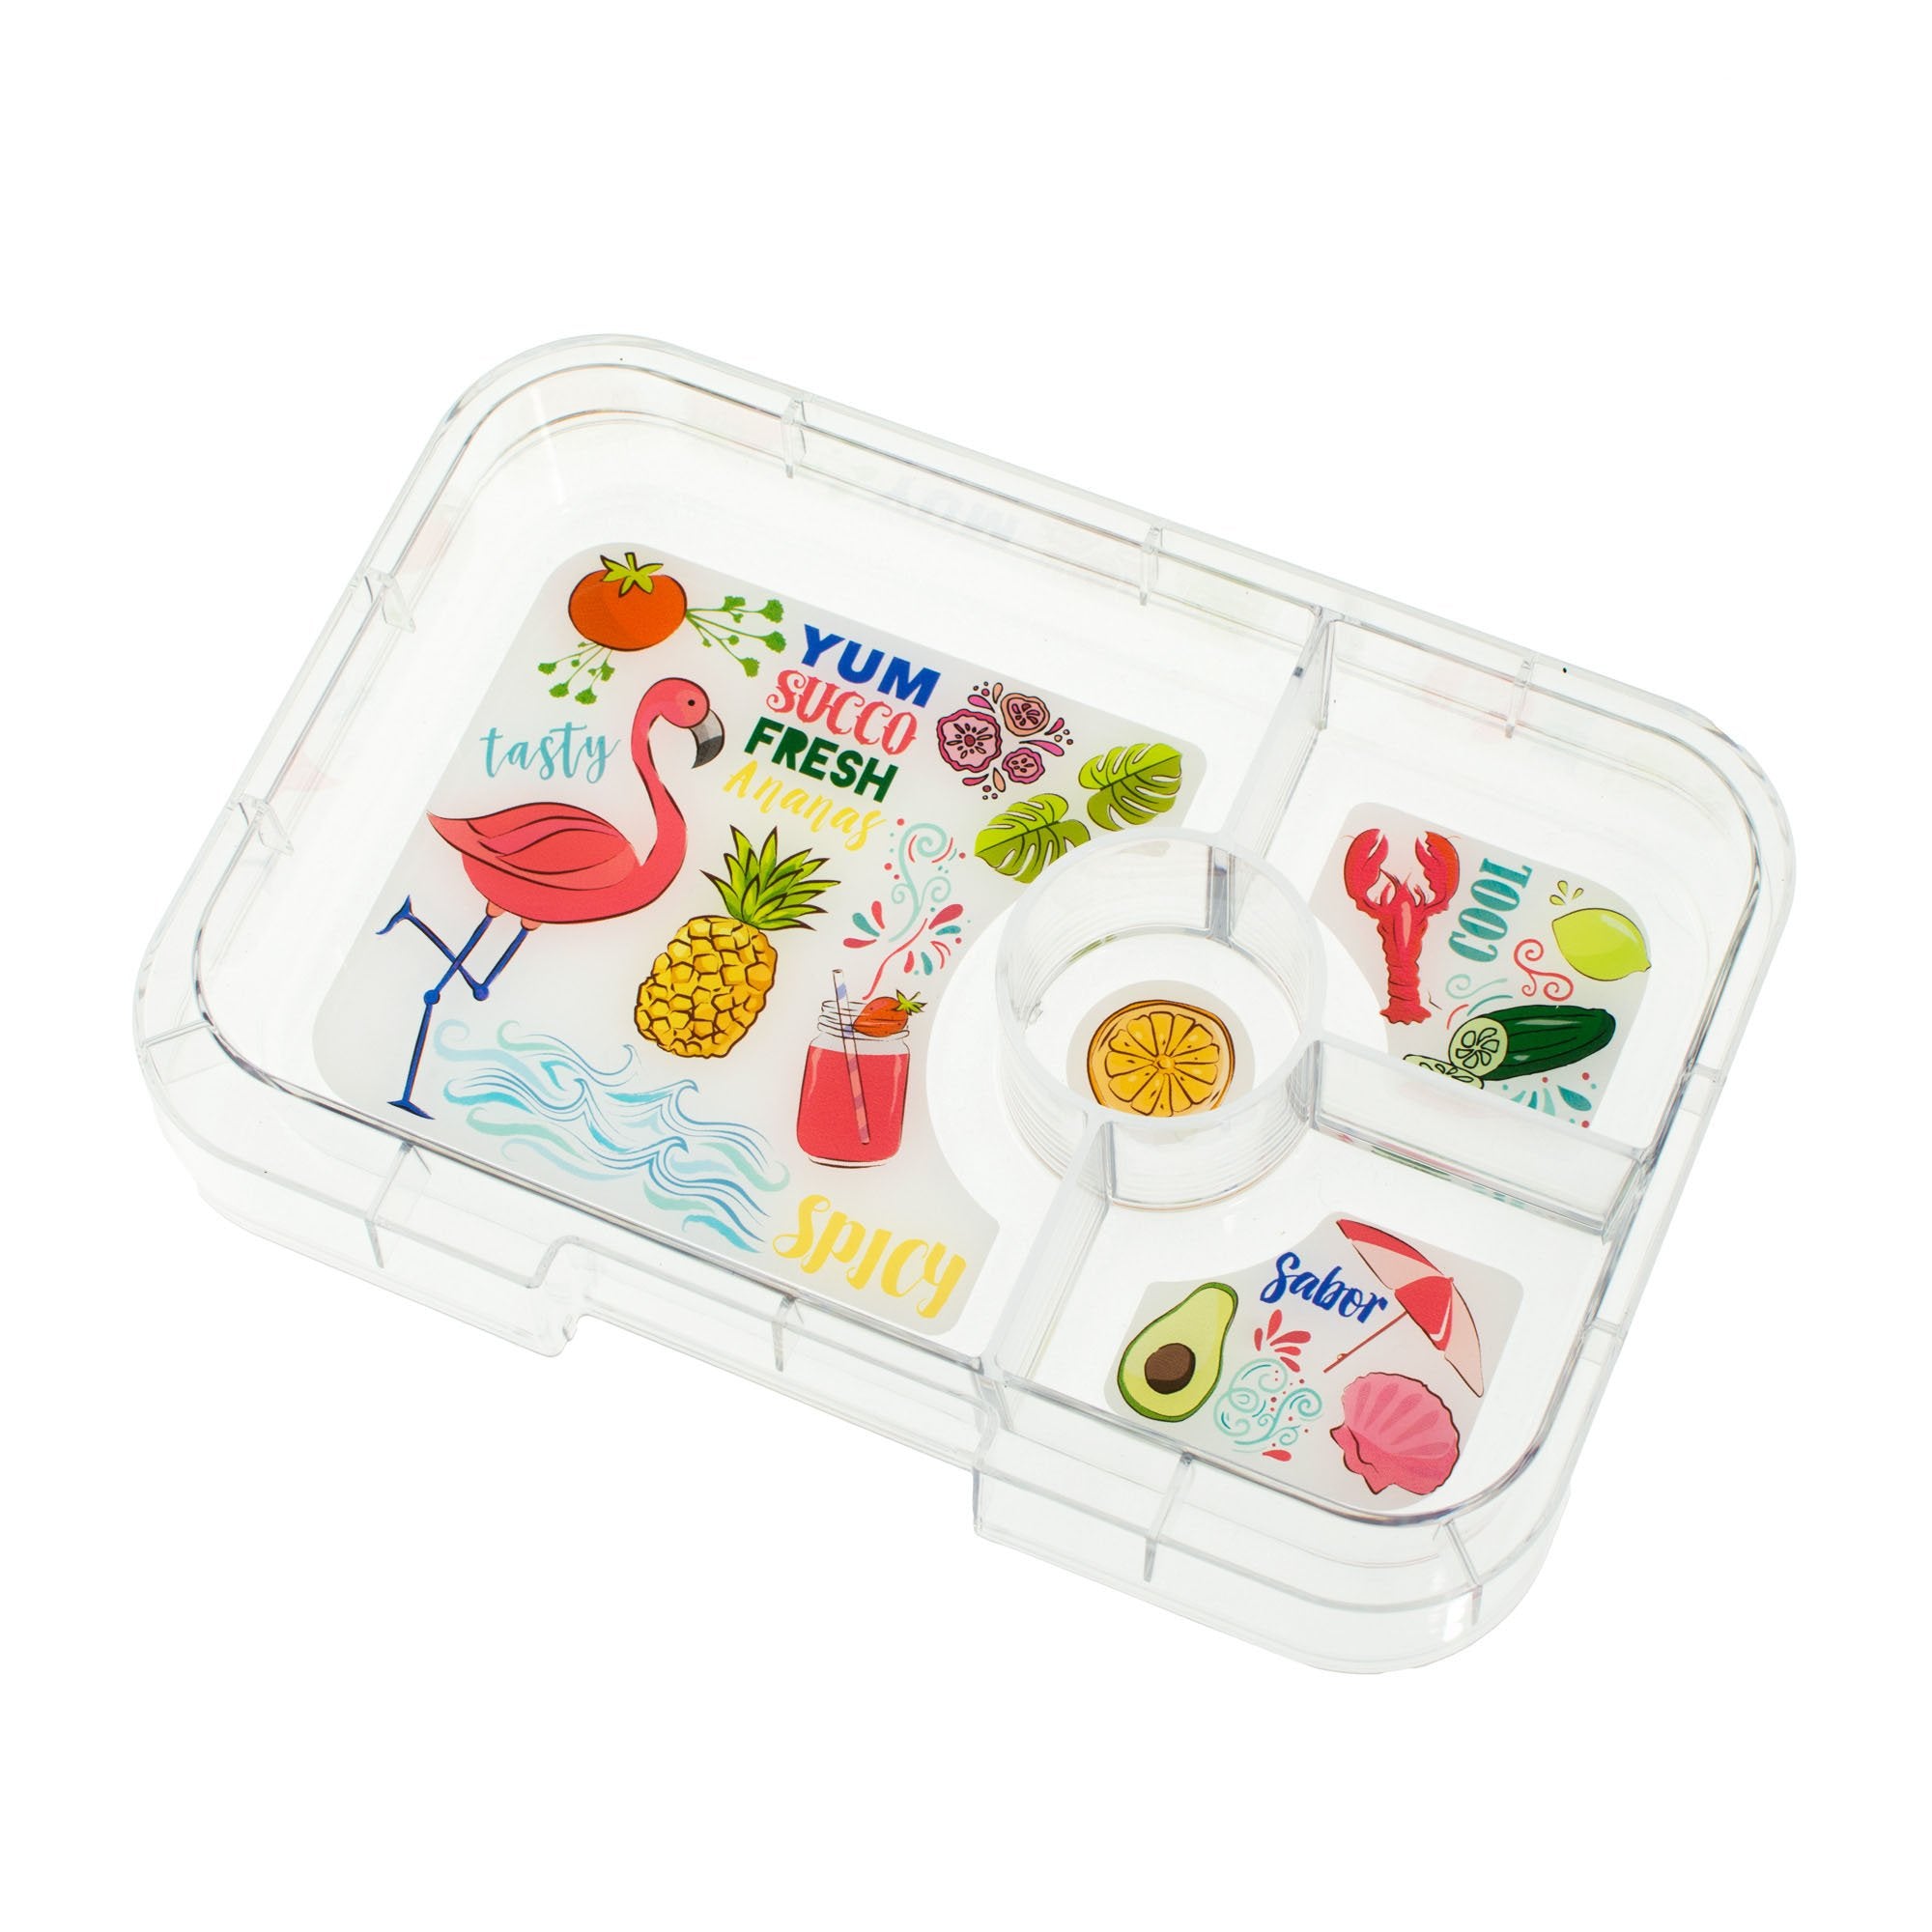 Yumbox Tapas Antibes Blue Flamingo 4 Compartment Lunch Box